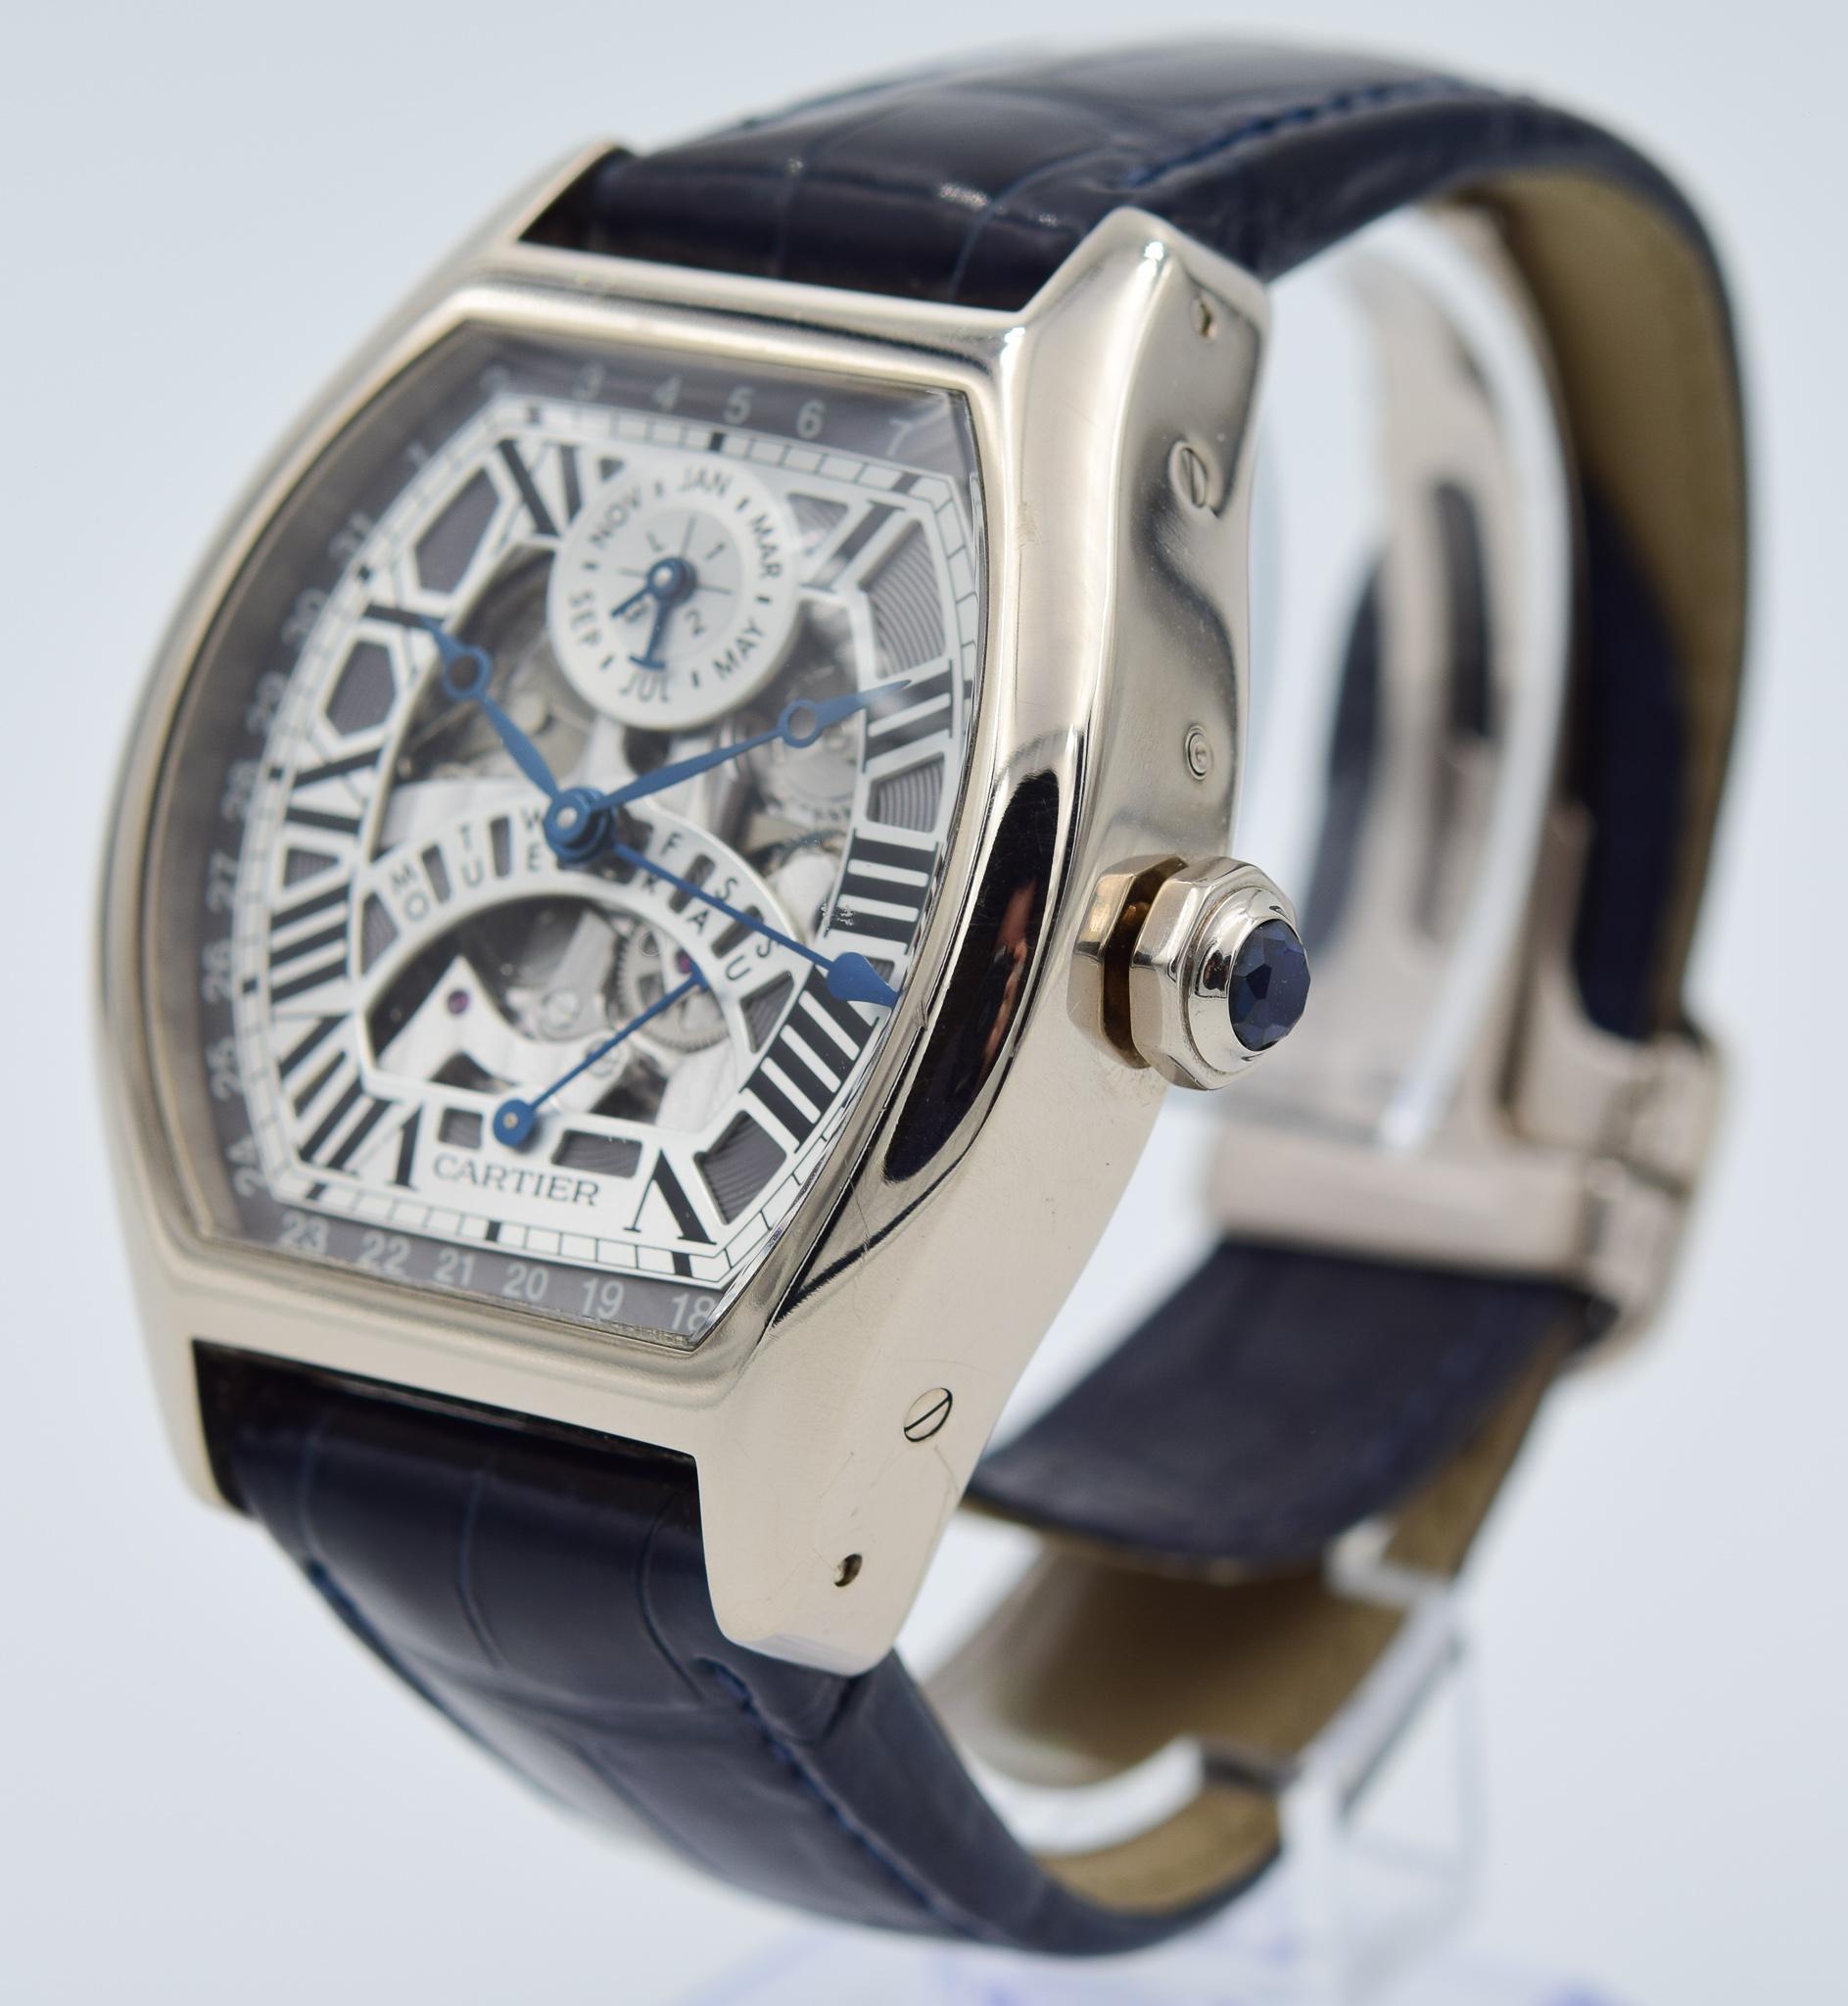 This Cartier came to us on trade recently and does have the full box and papers.  This Tortue features a skeleton dial with an incredible perpetual calendar!  The watch is an automatic piece with approximately a 46mm case in a tonneau shape.  The